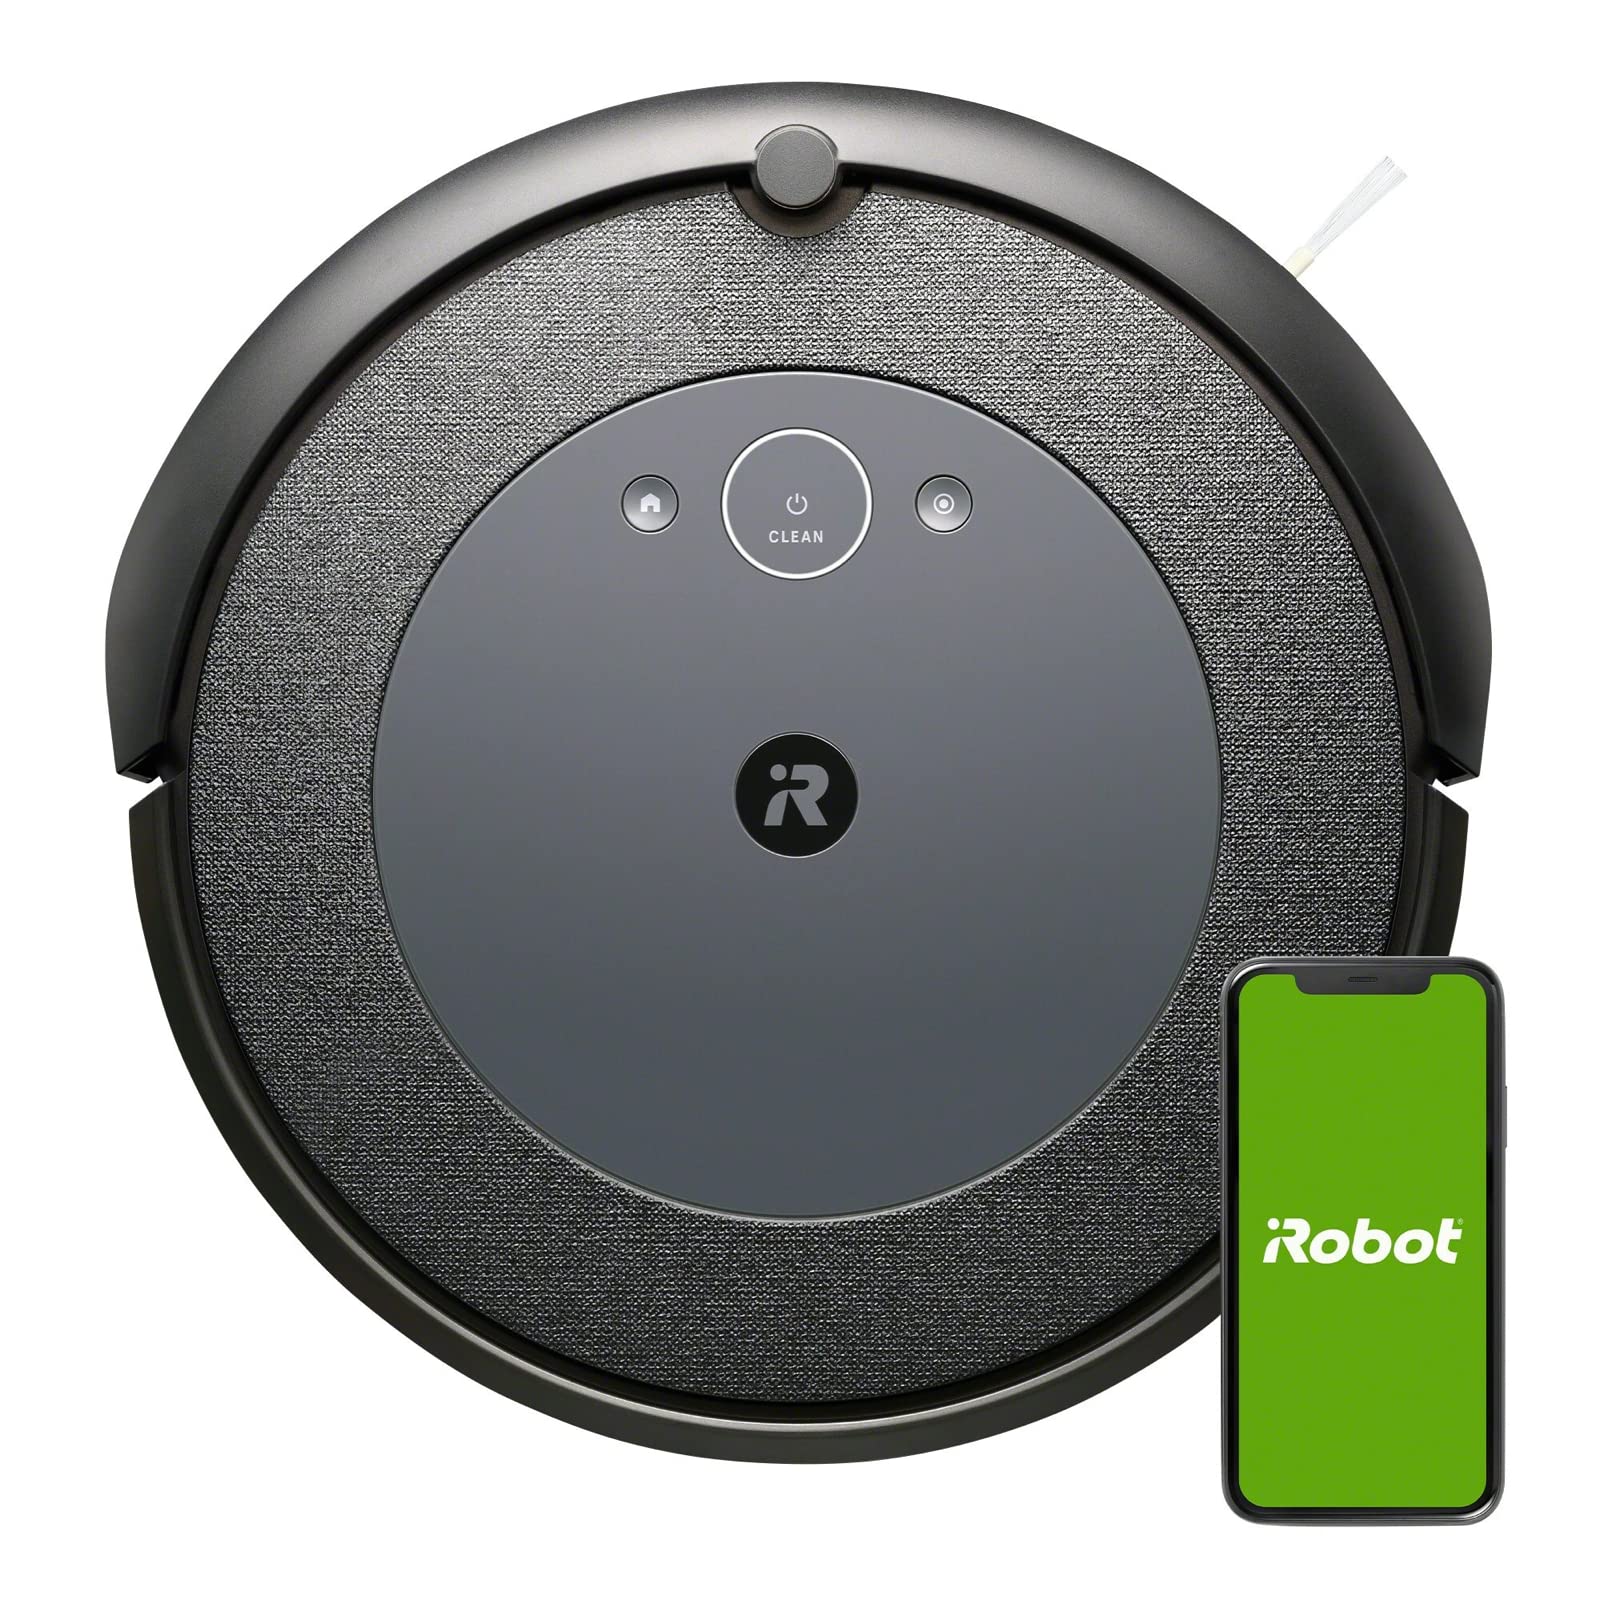 get-the-irobot-roomba-robot-vacuum-for-only-149-99